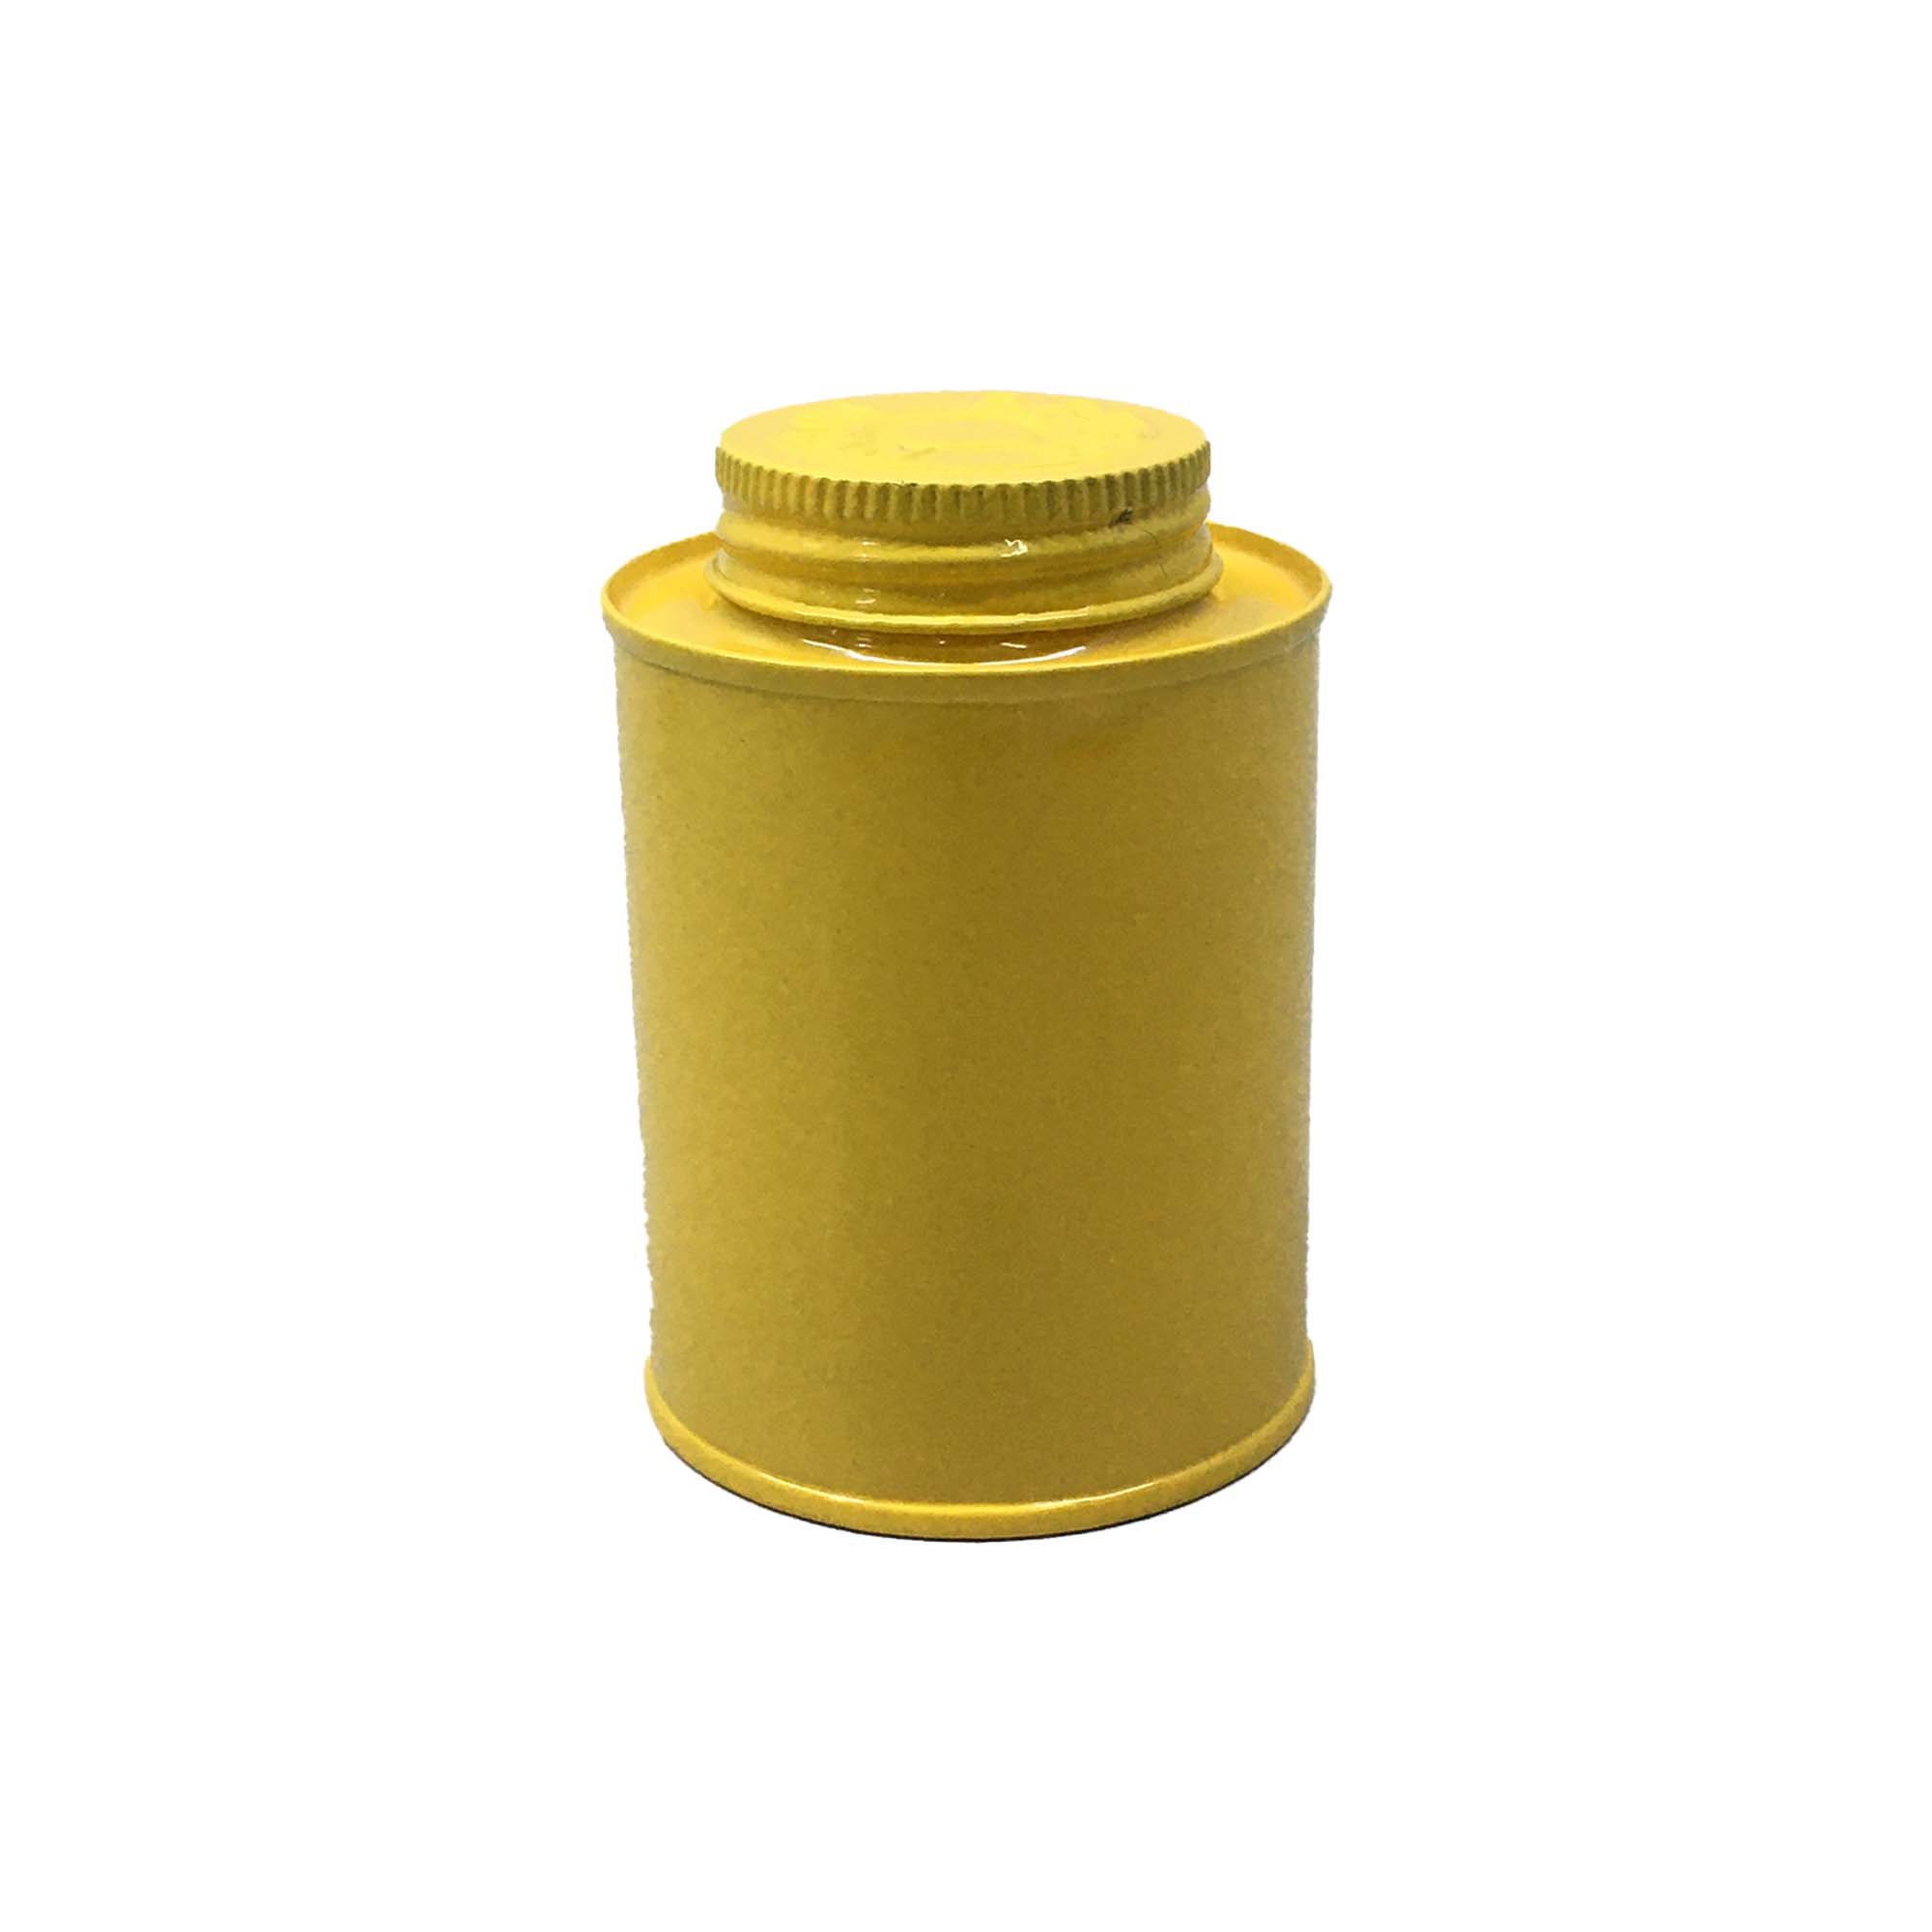 Vintage Spice Tin Canister Yellow  6x9.5cm